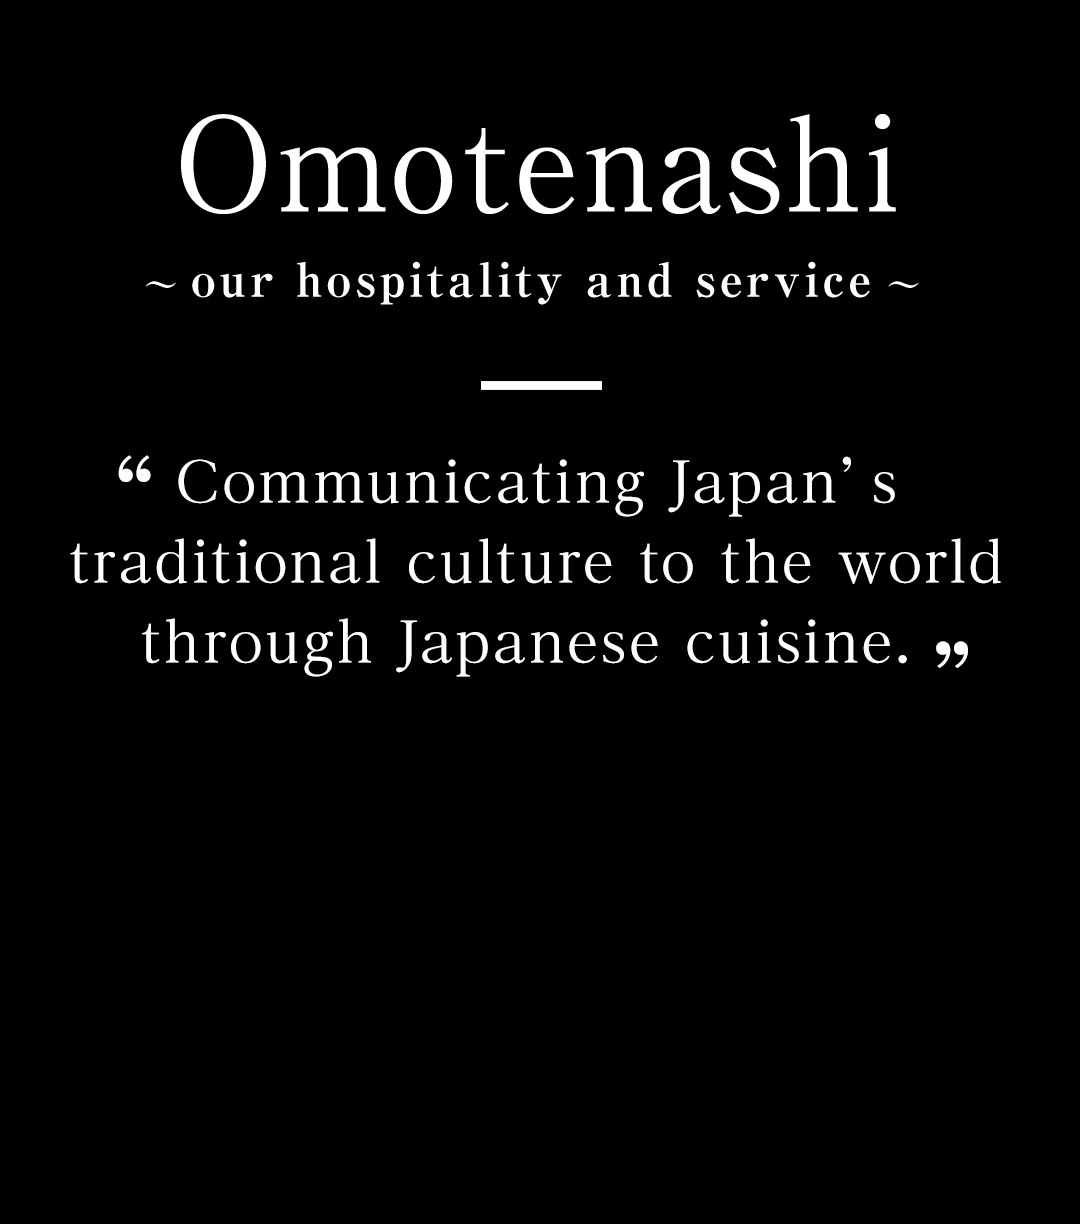 Omotenashi - our hospitality and service | Communicating Japan’s traditional culture to the world through Japanese cuisine.